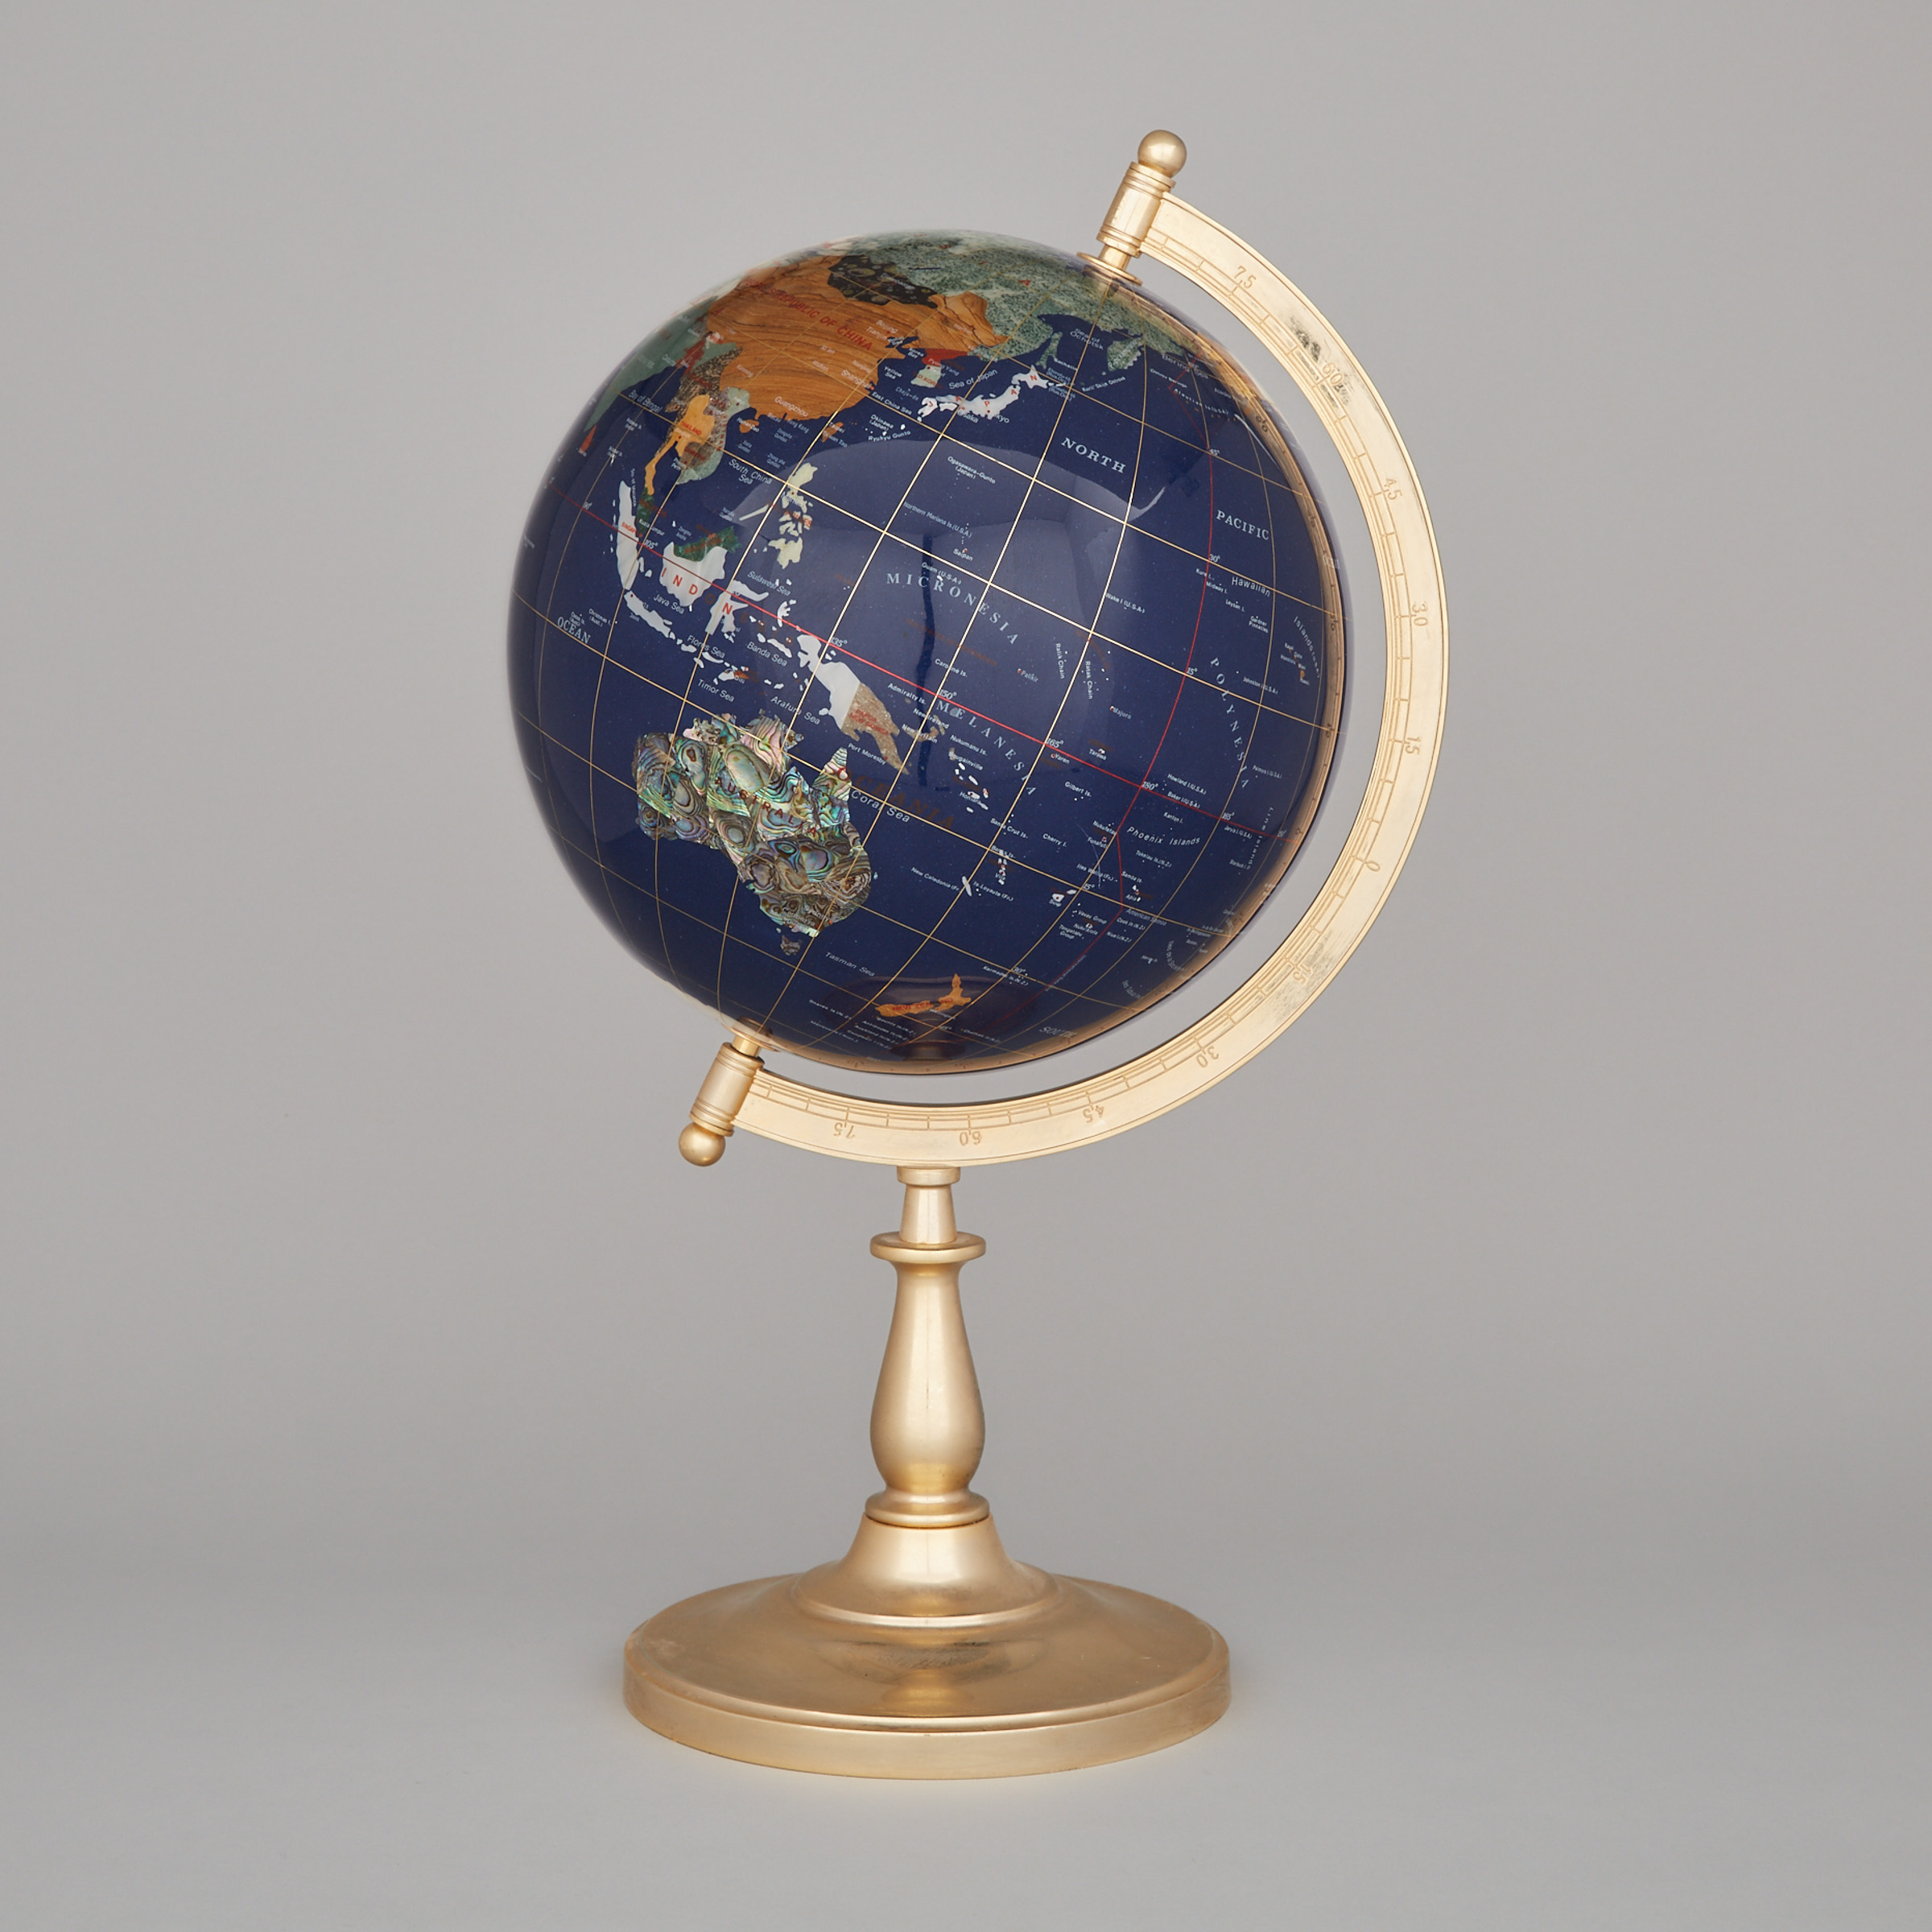 Specimen Mineral and Shell Inlaid Terrestrial Globe on Brass Stand, 20th century